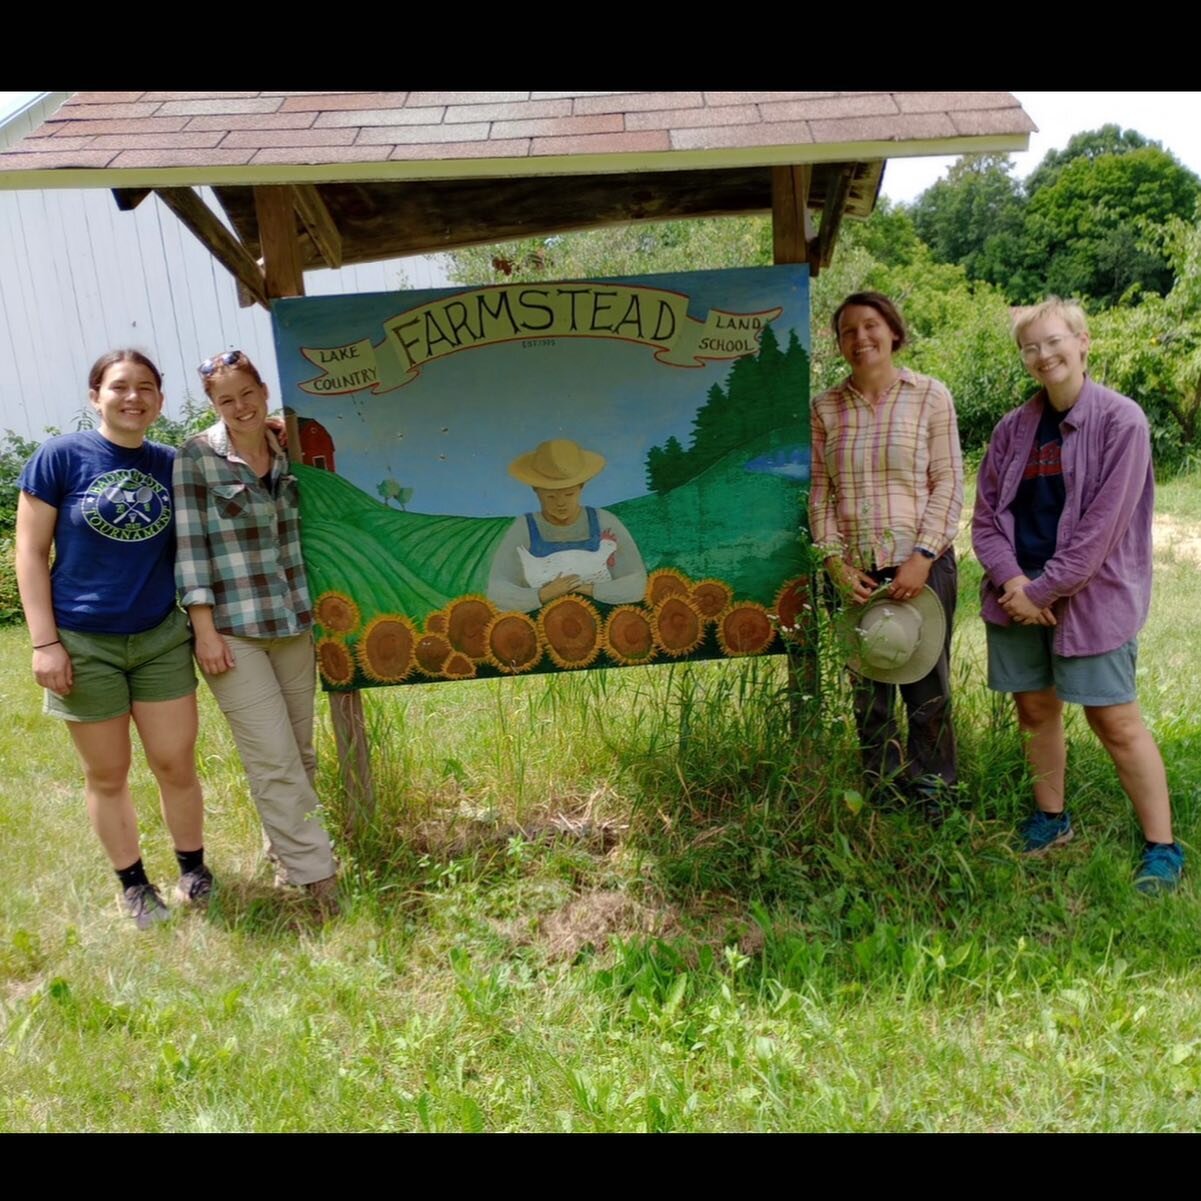 Farm tour # 2!! This time Julia and the interns went to the Lake Country Montessori Land School extension to see what it&rsquo;s like on a farm much bigger than ours. Lots to learn! 
Animals there included Davey the chicken, Pepper and Rheah the llam